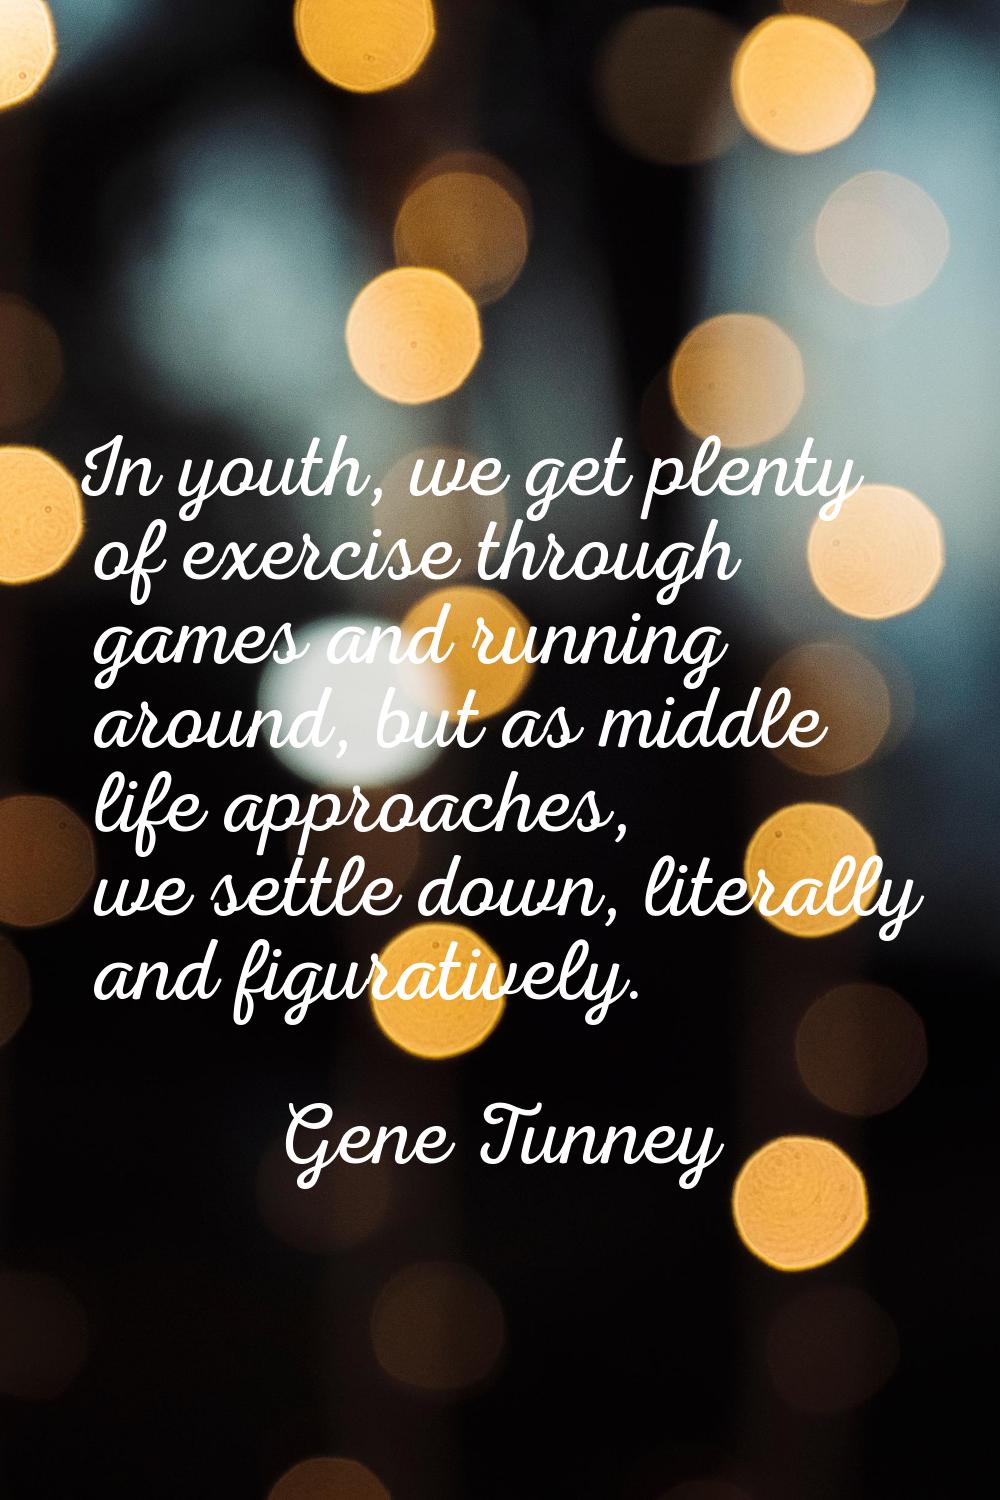 In youth, we get plenty of exercise through games and running around, but as middle life approaches